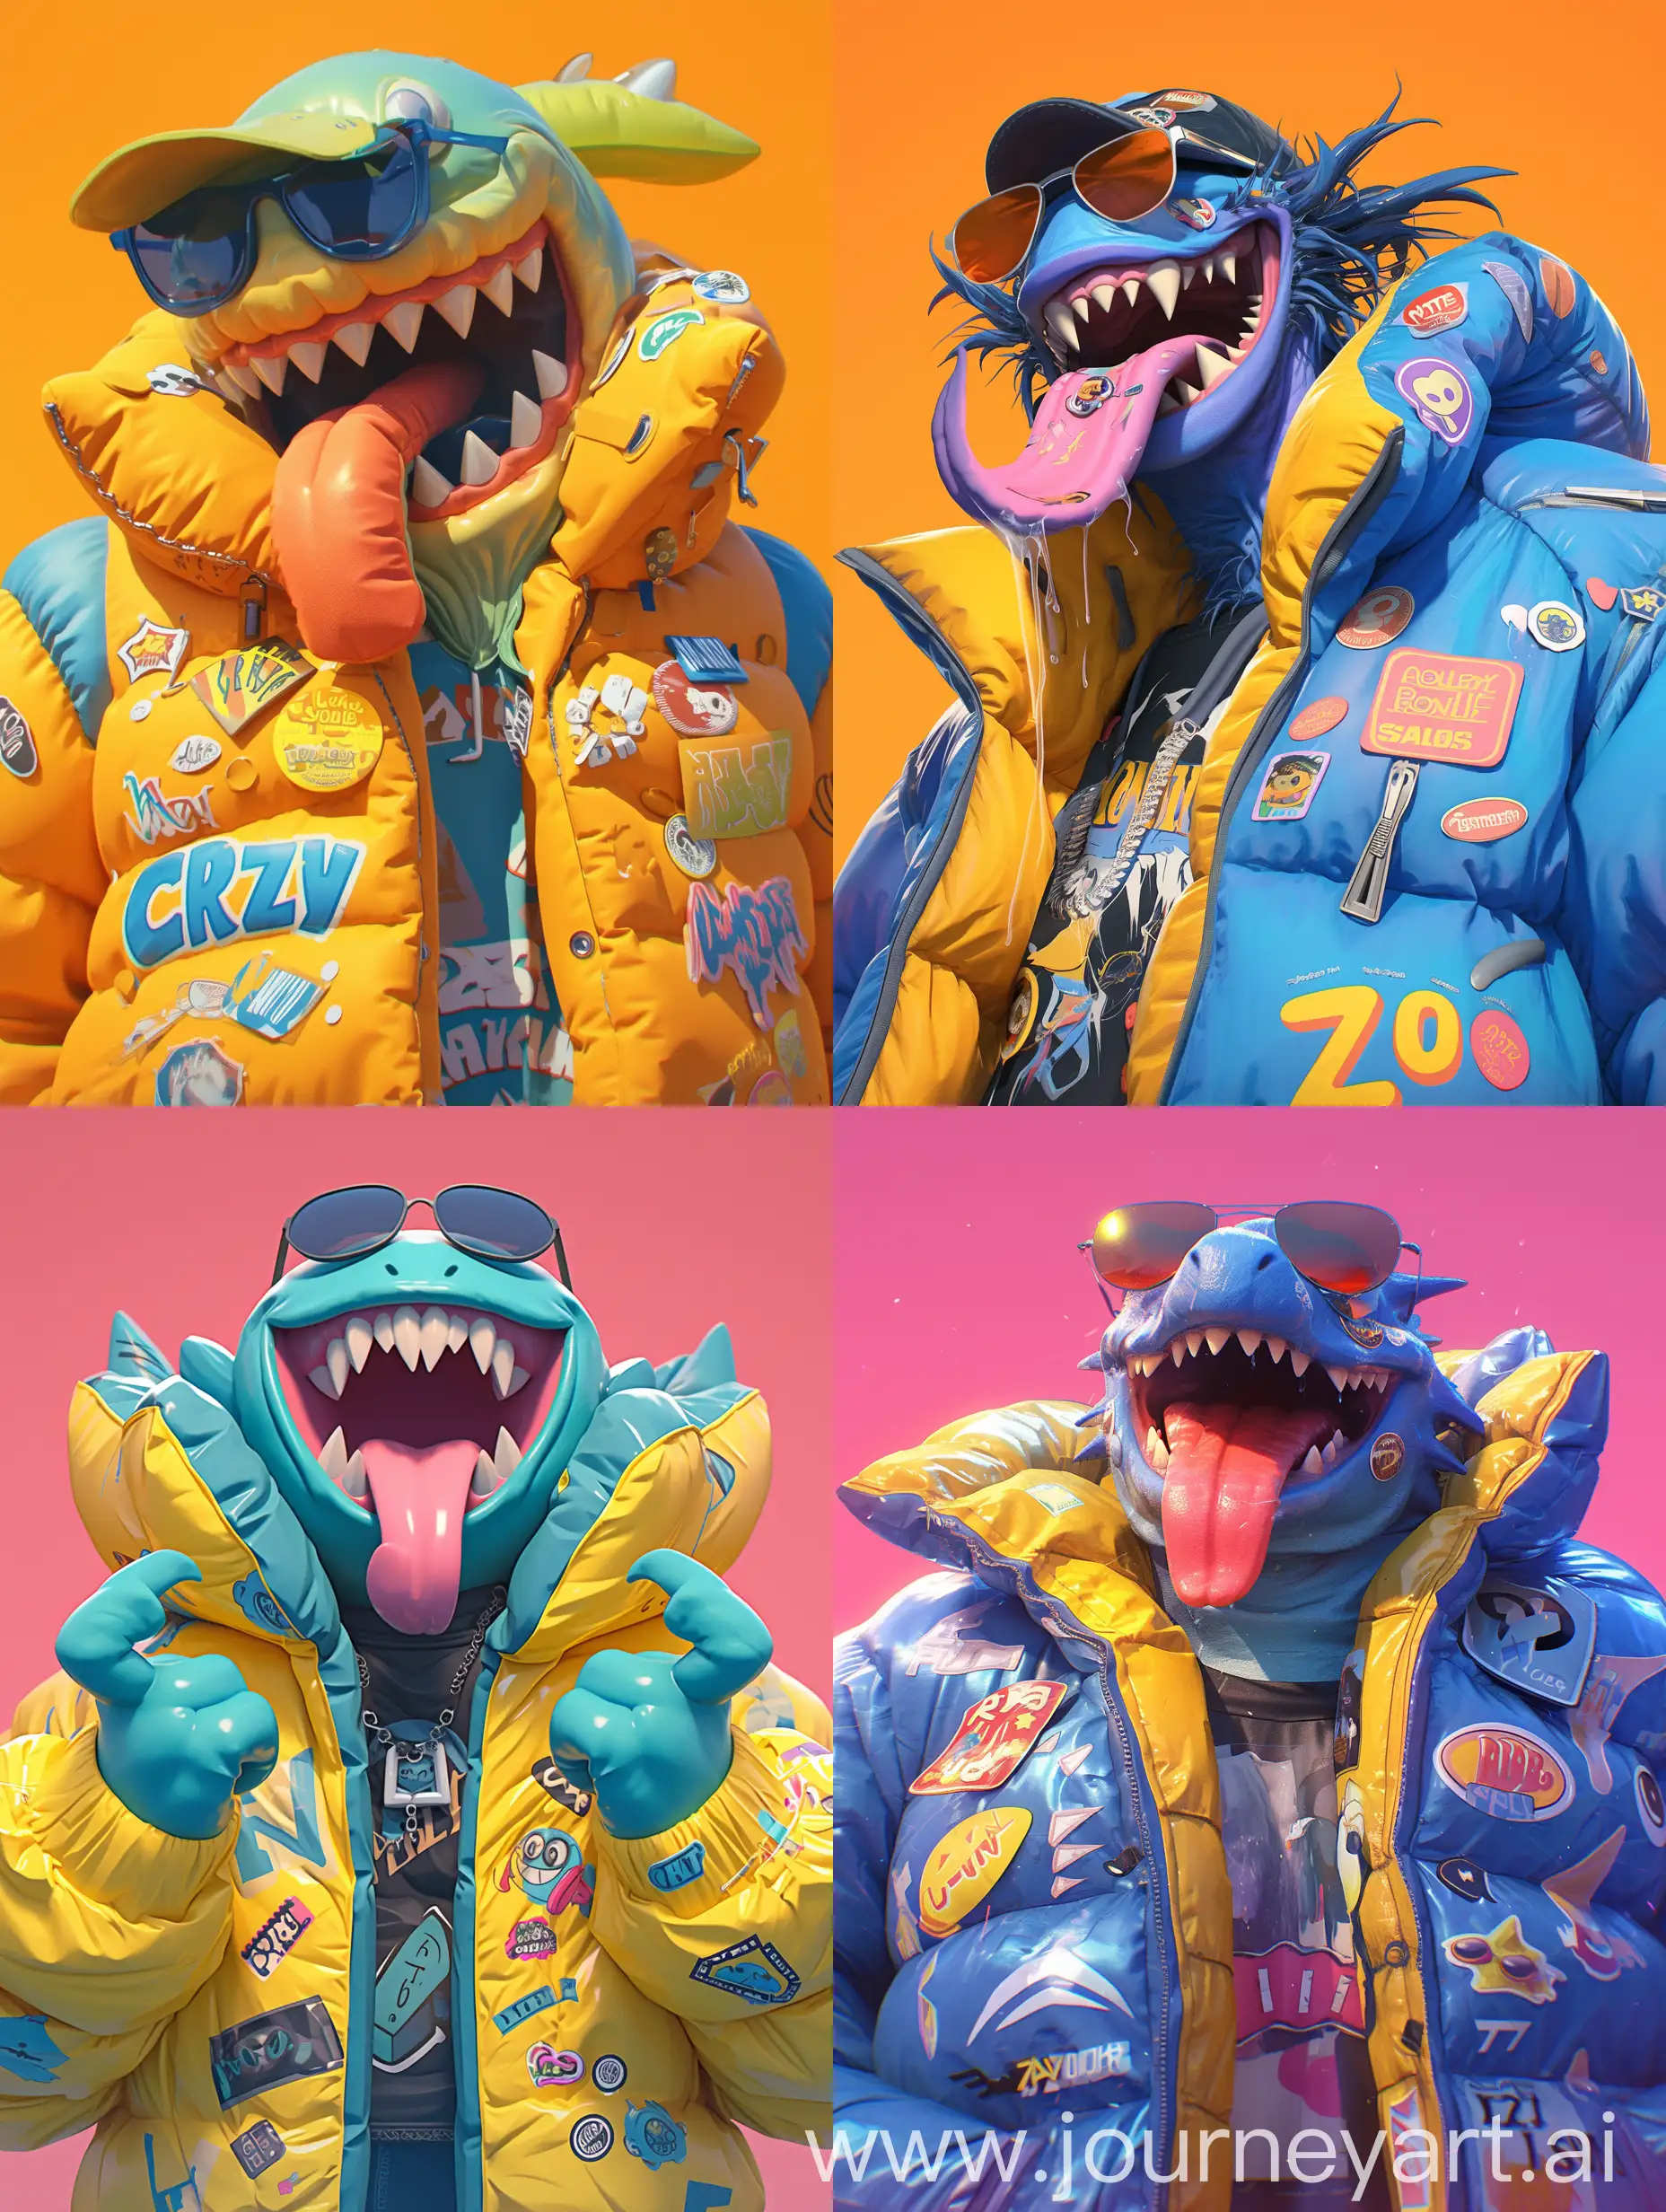 Vibrant-3D-Rendering-of-a-Smiling-Crazy-Monster-in-Oversized-Puffy-Jacket